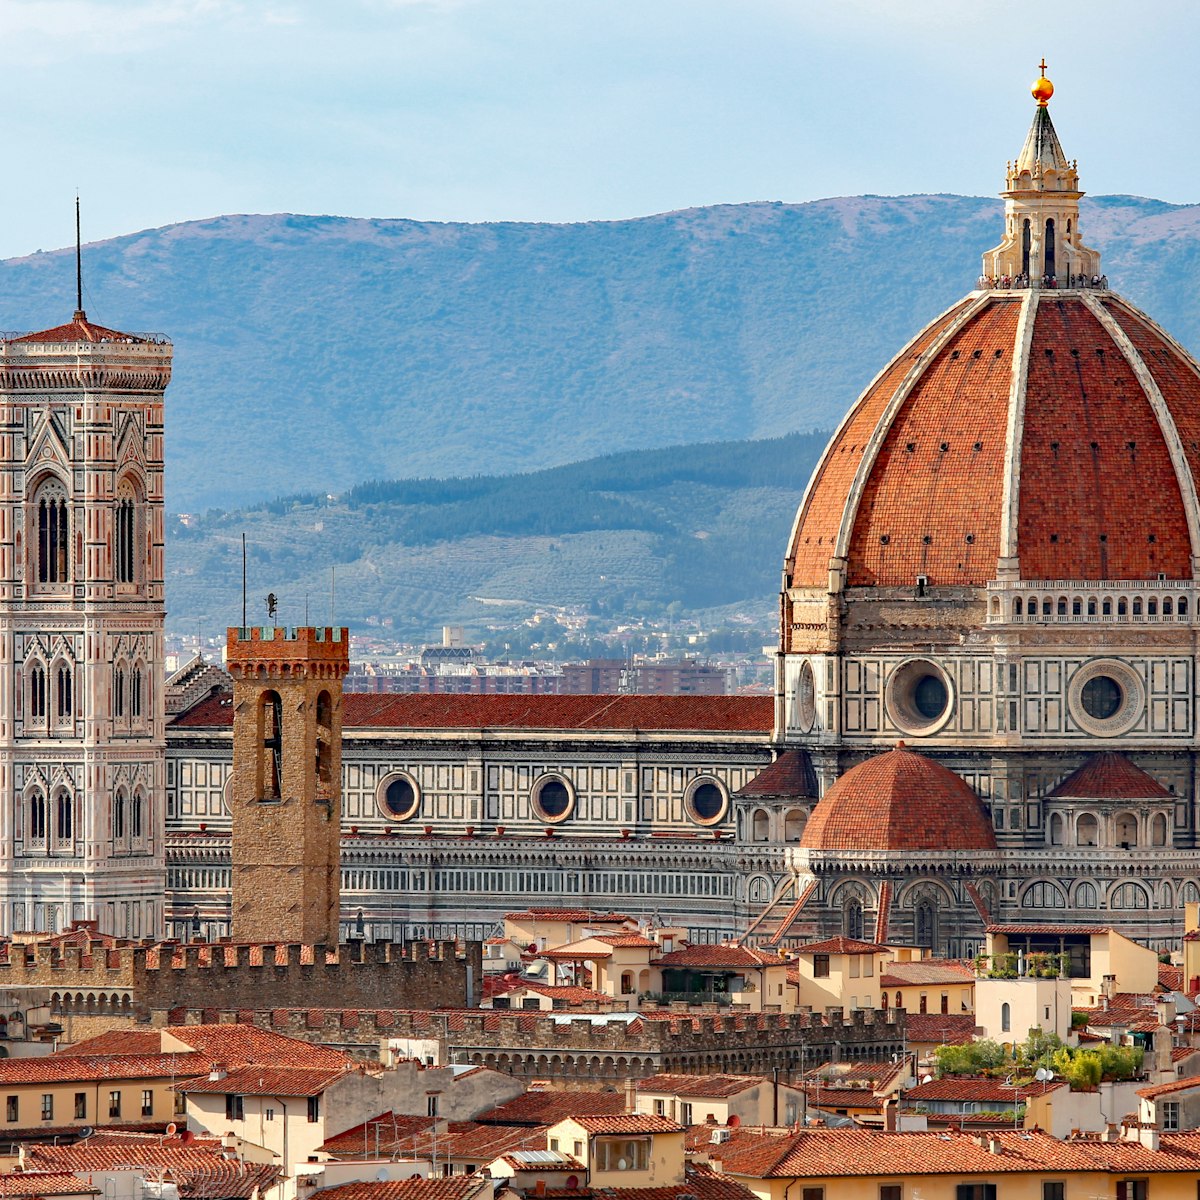 FLORENCE in Italy with the great dome of the Cathedral called Duomo di Firenze.